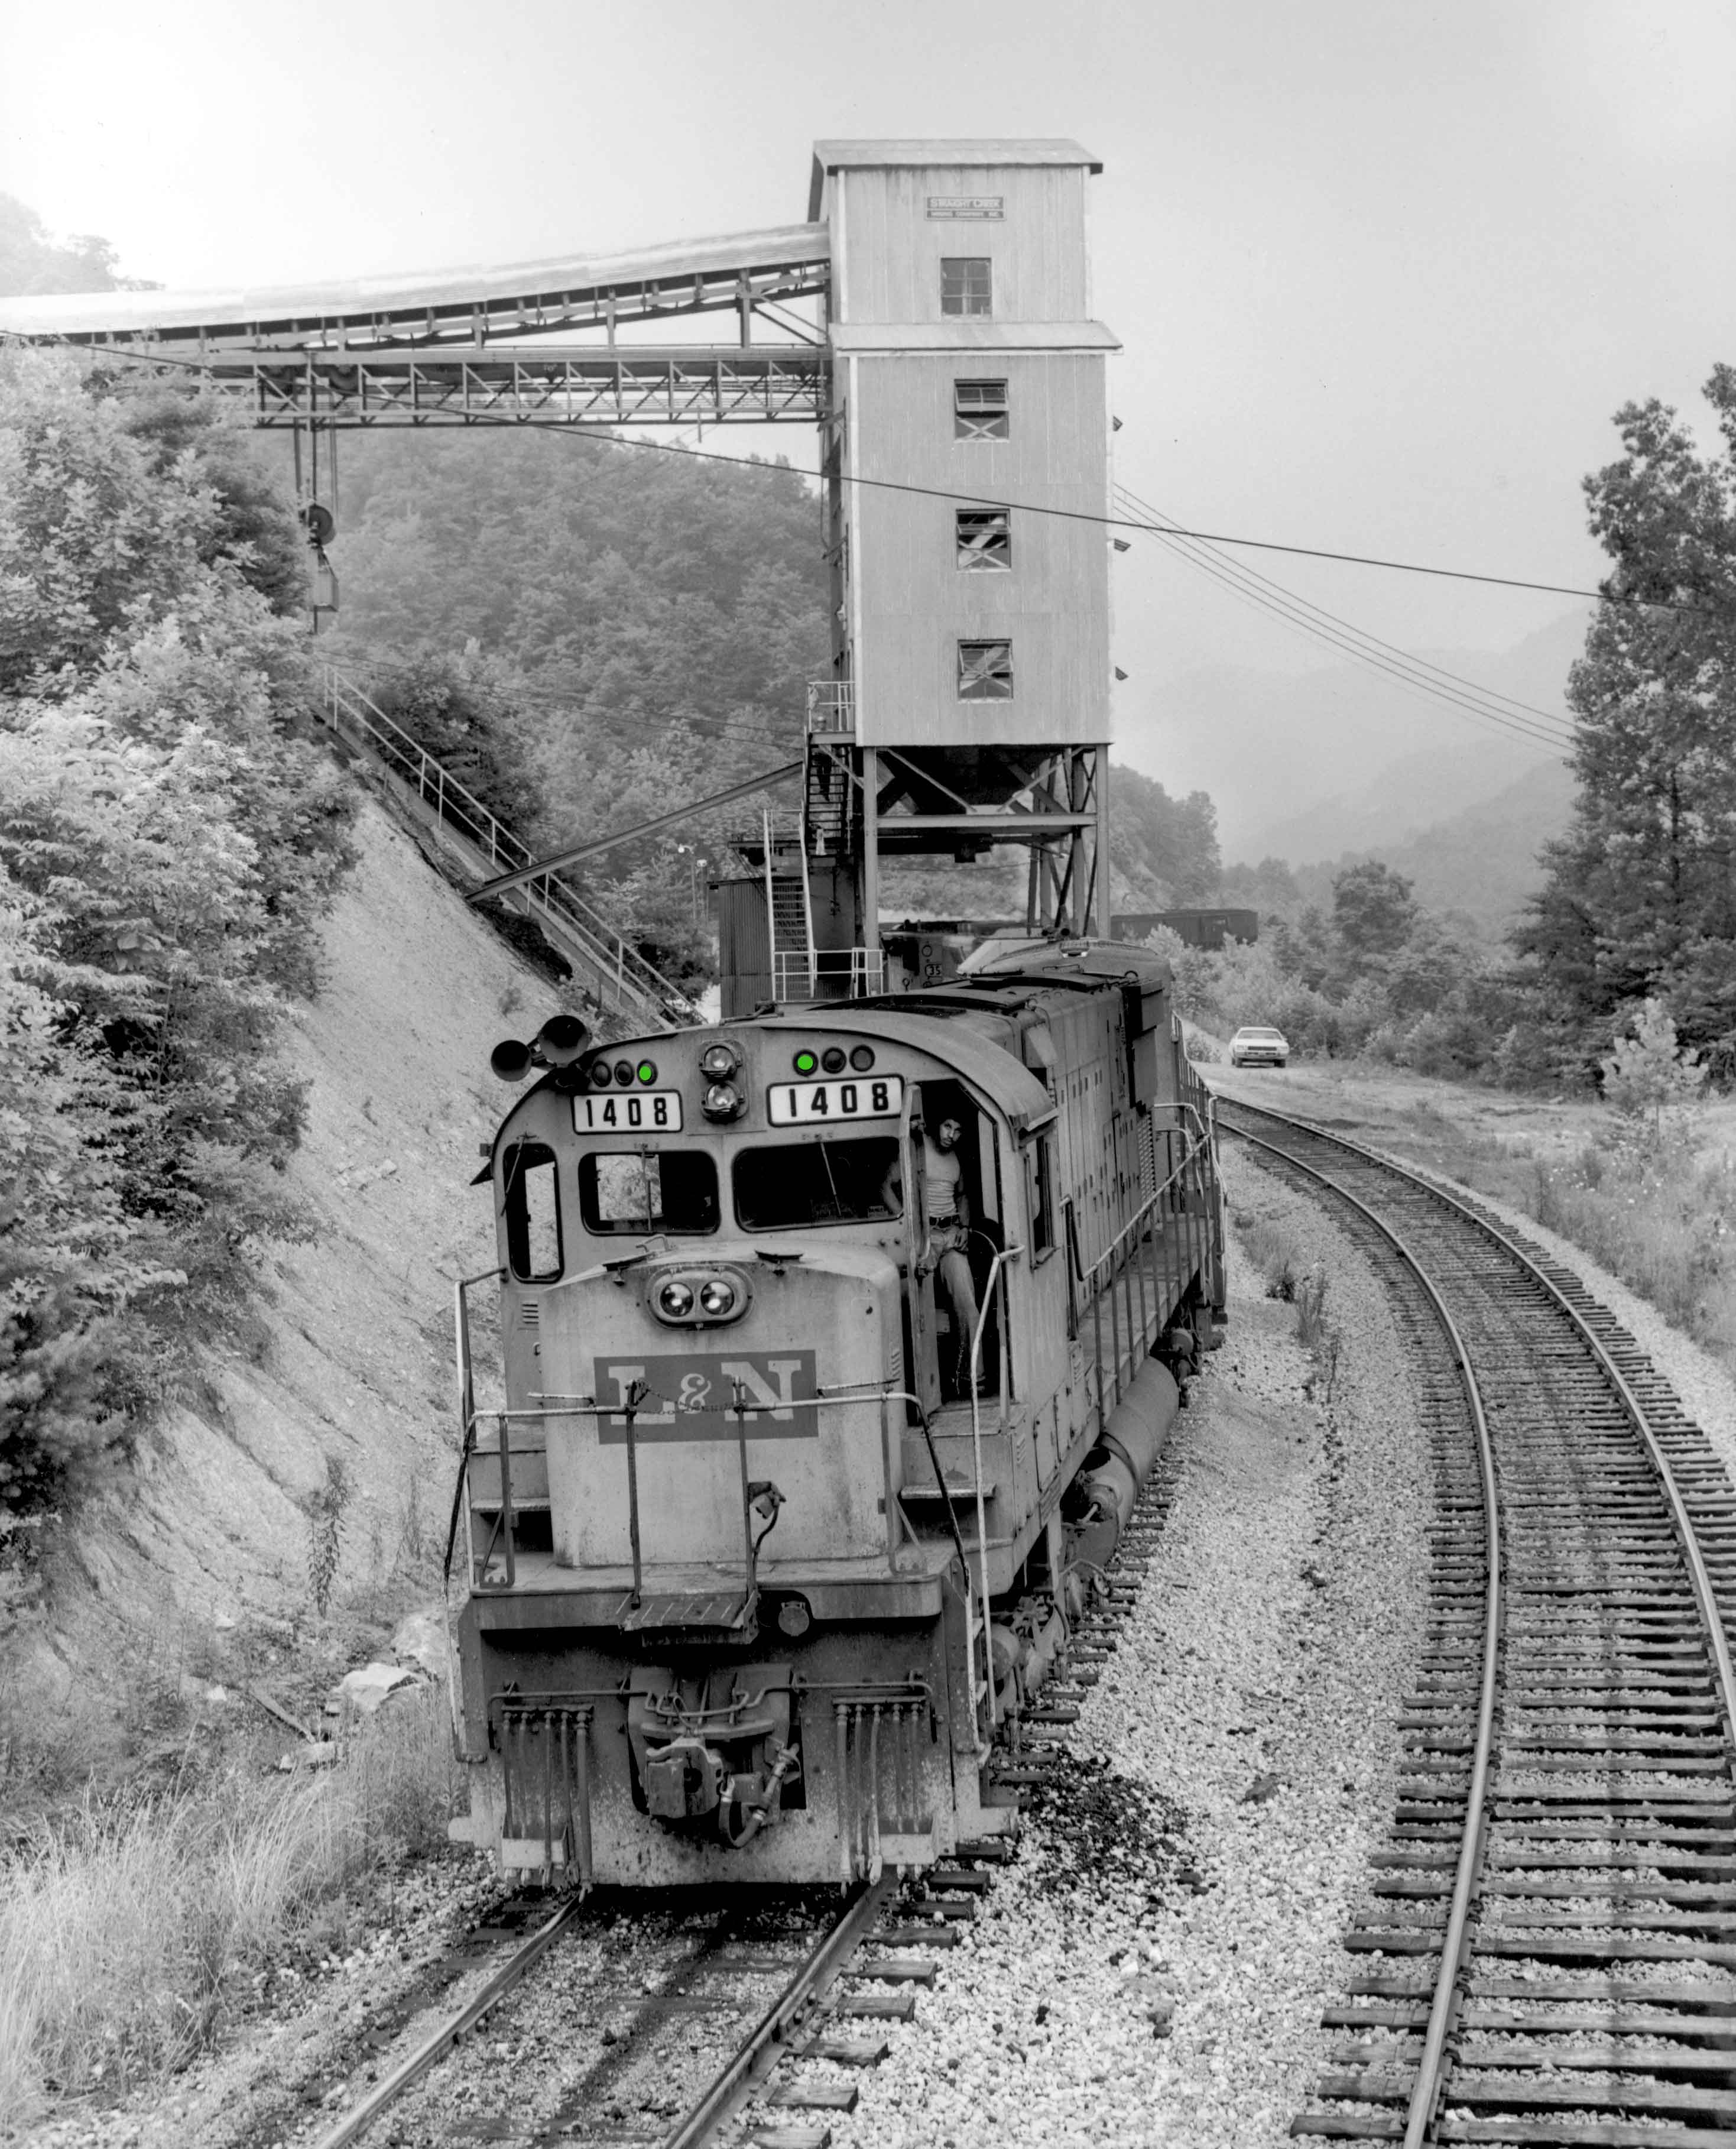 1977. Six-axle ALCO's reign supreme on the L&N's Corbin Division. However, there was always time for the Engineer to grab a classic photo. At KANEB Energy tipple on Straight Creek Extension, deep in the coalfields east of Pineville.